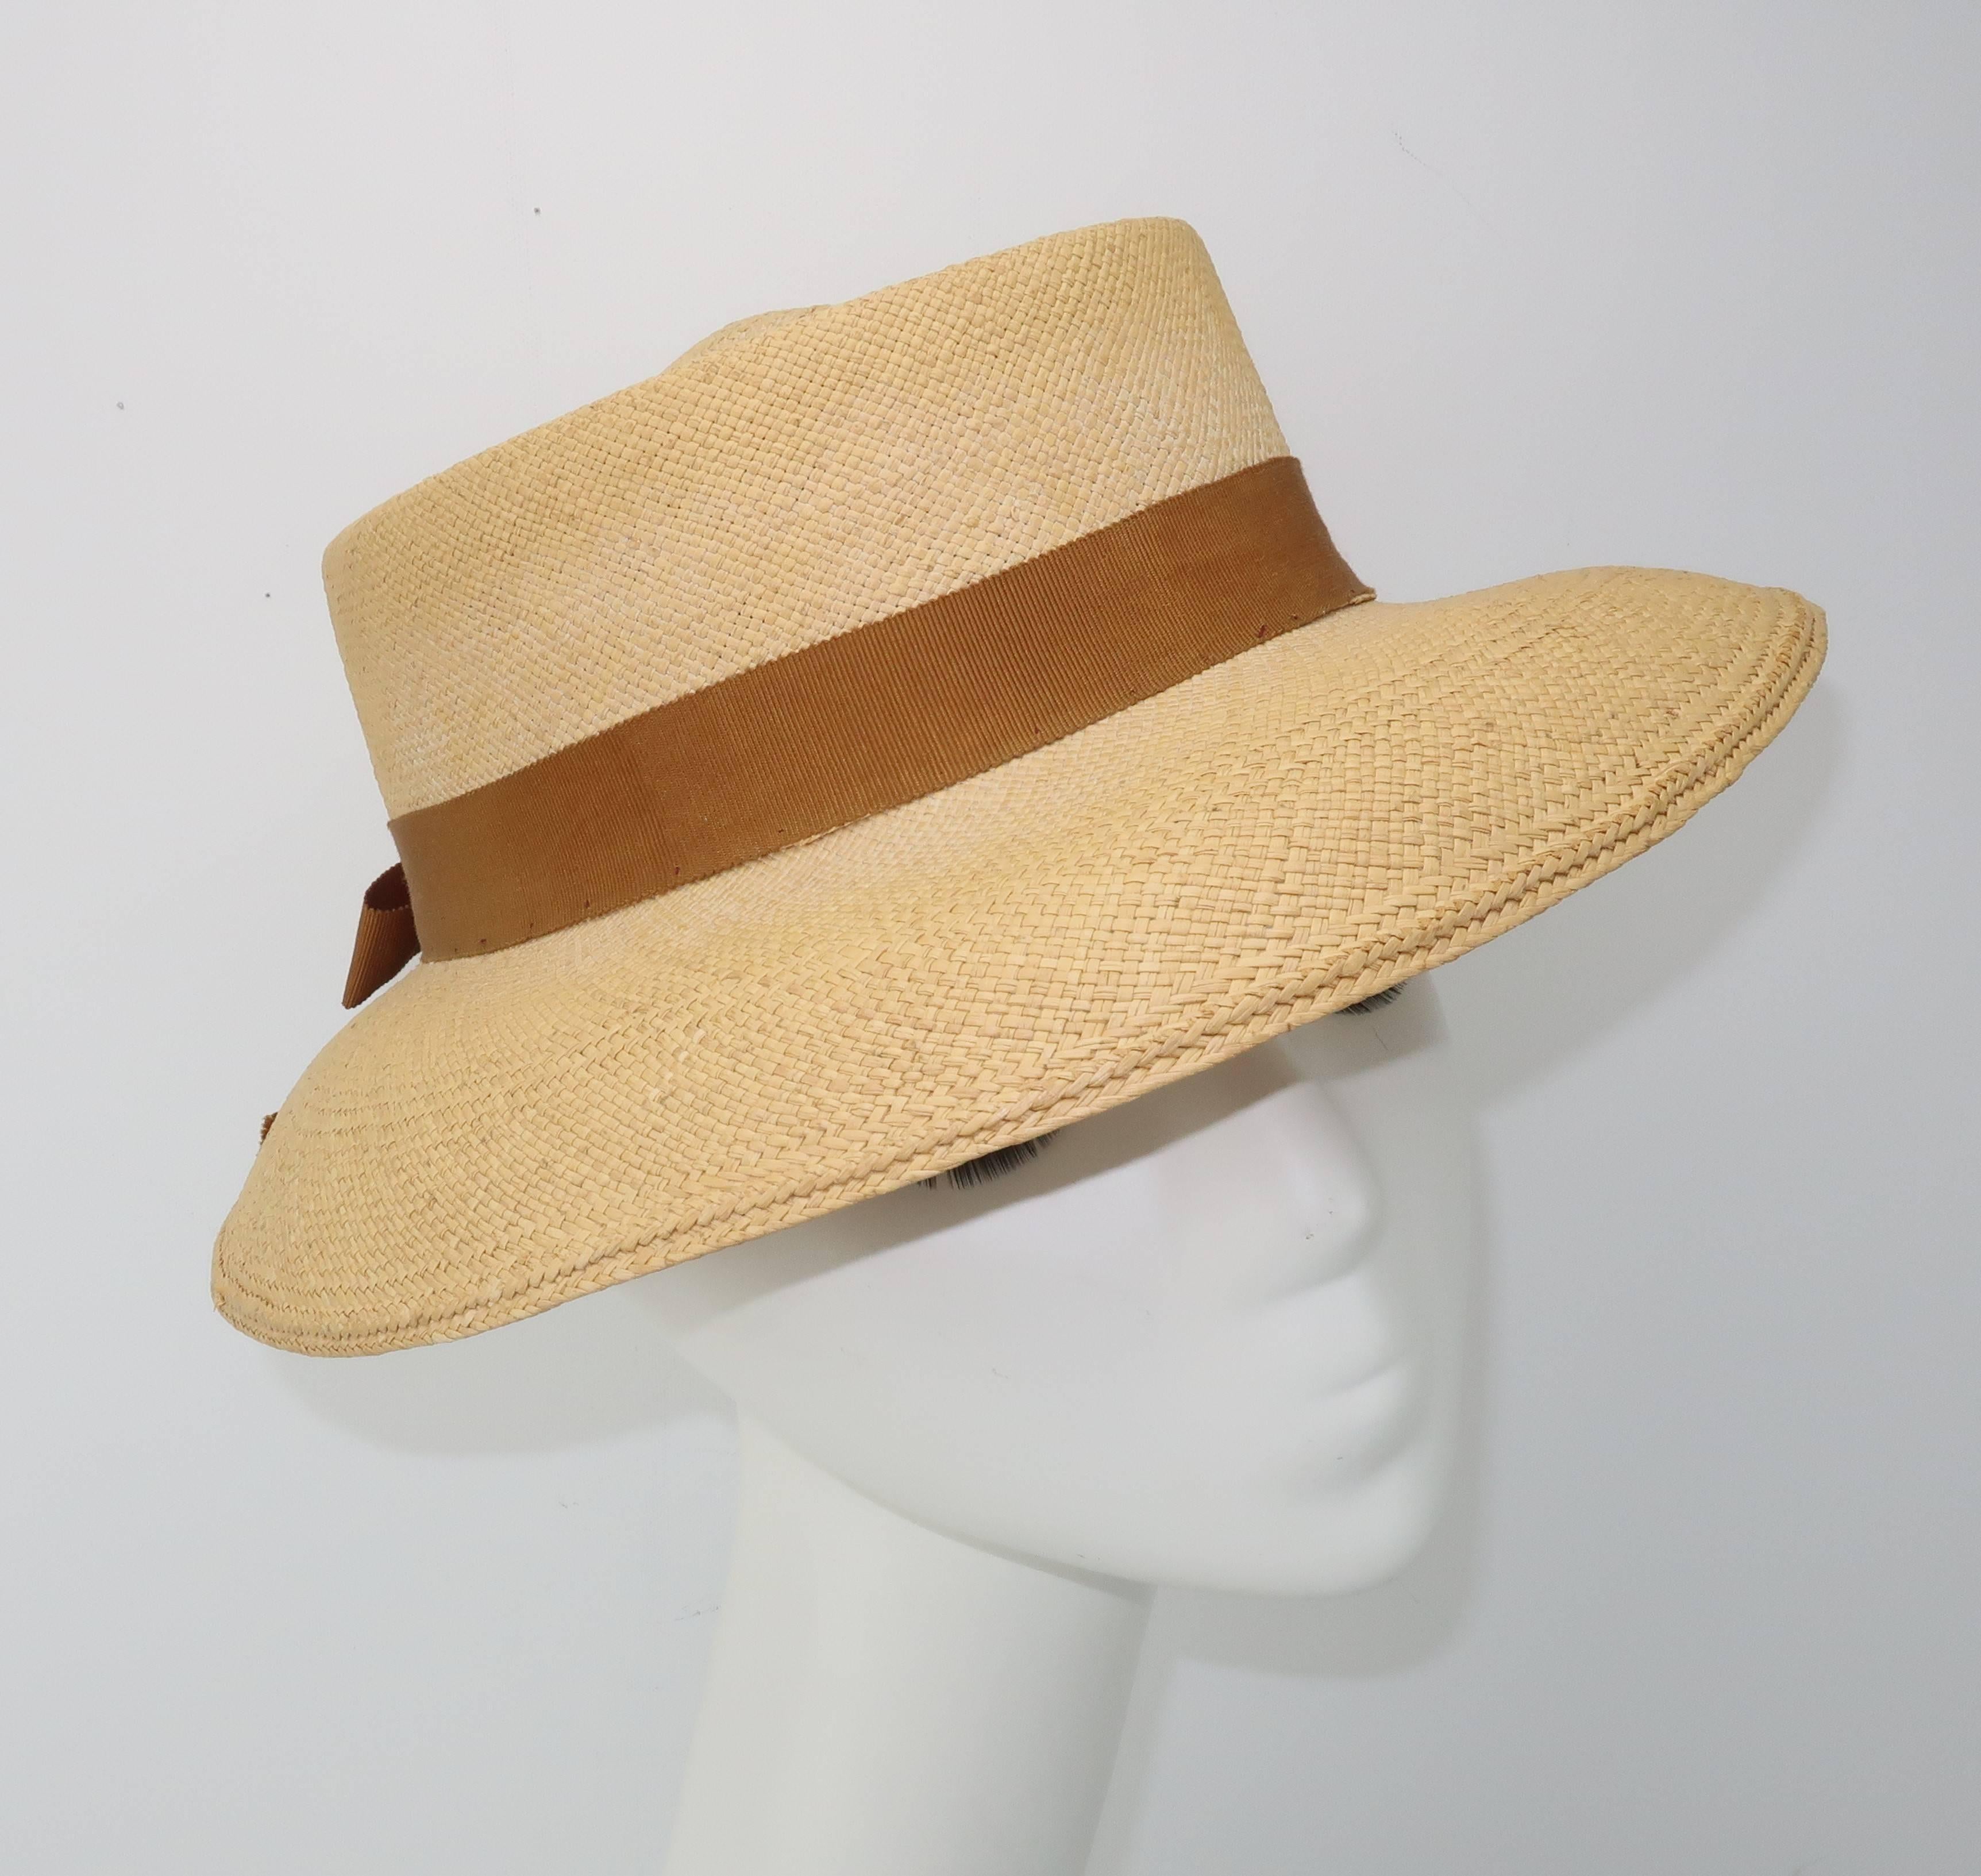 The ‘Panama’ hat has been worn and admired since the 1800’s for its functional and effortless style especially in warm weather climates often paired with summer linens.  This ladies 'Panaire' design was produced by the American hat company, Knox,